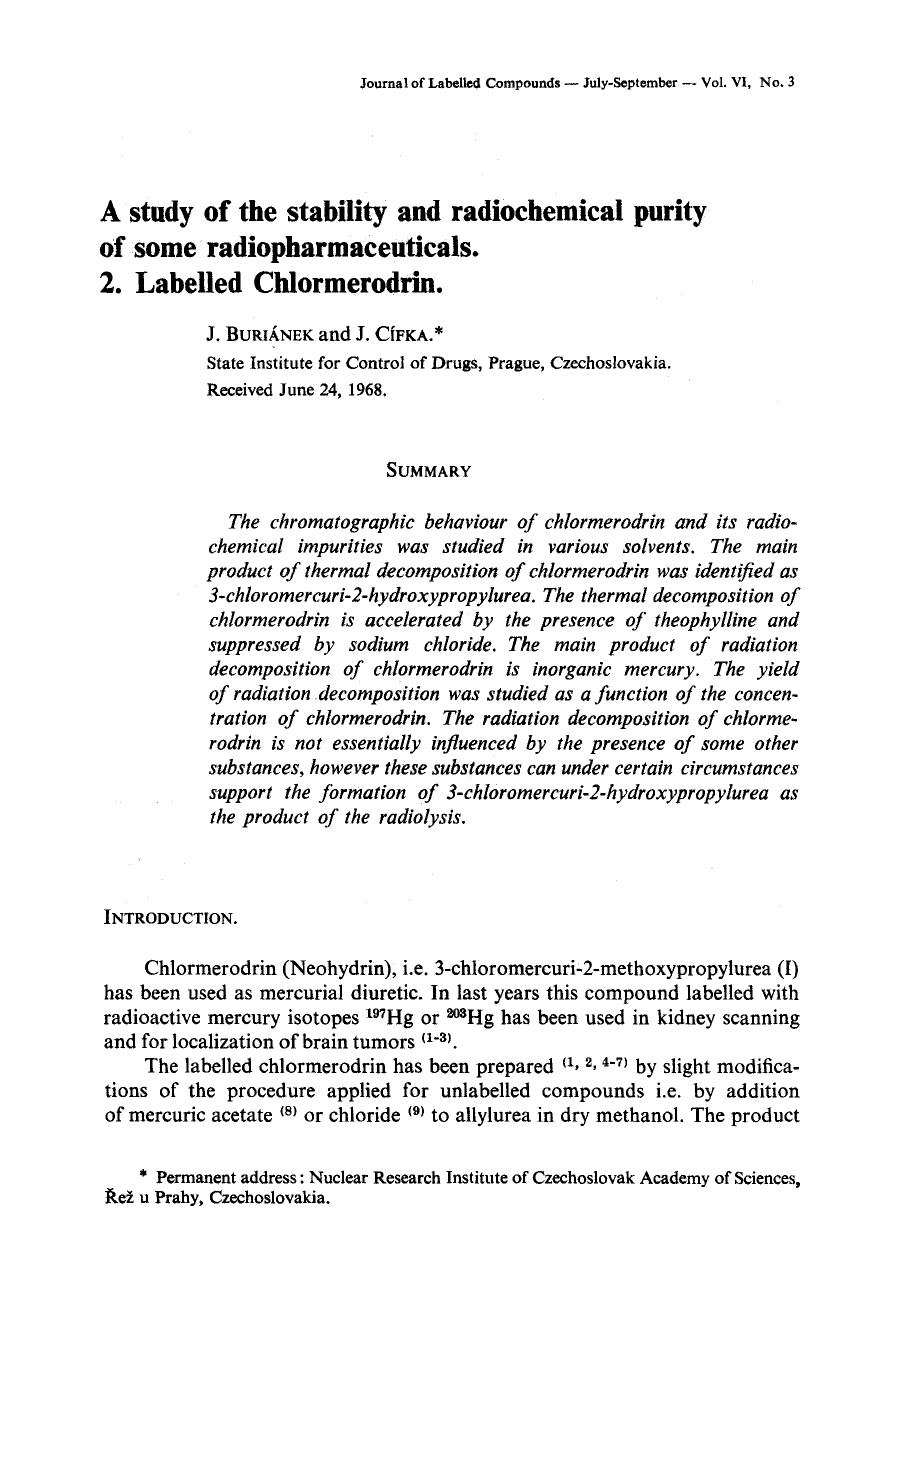 A study of the stability and radiochemical purity of some radiopharmaceuticals. 2. Labelled chlormerodrin by Unknown